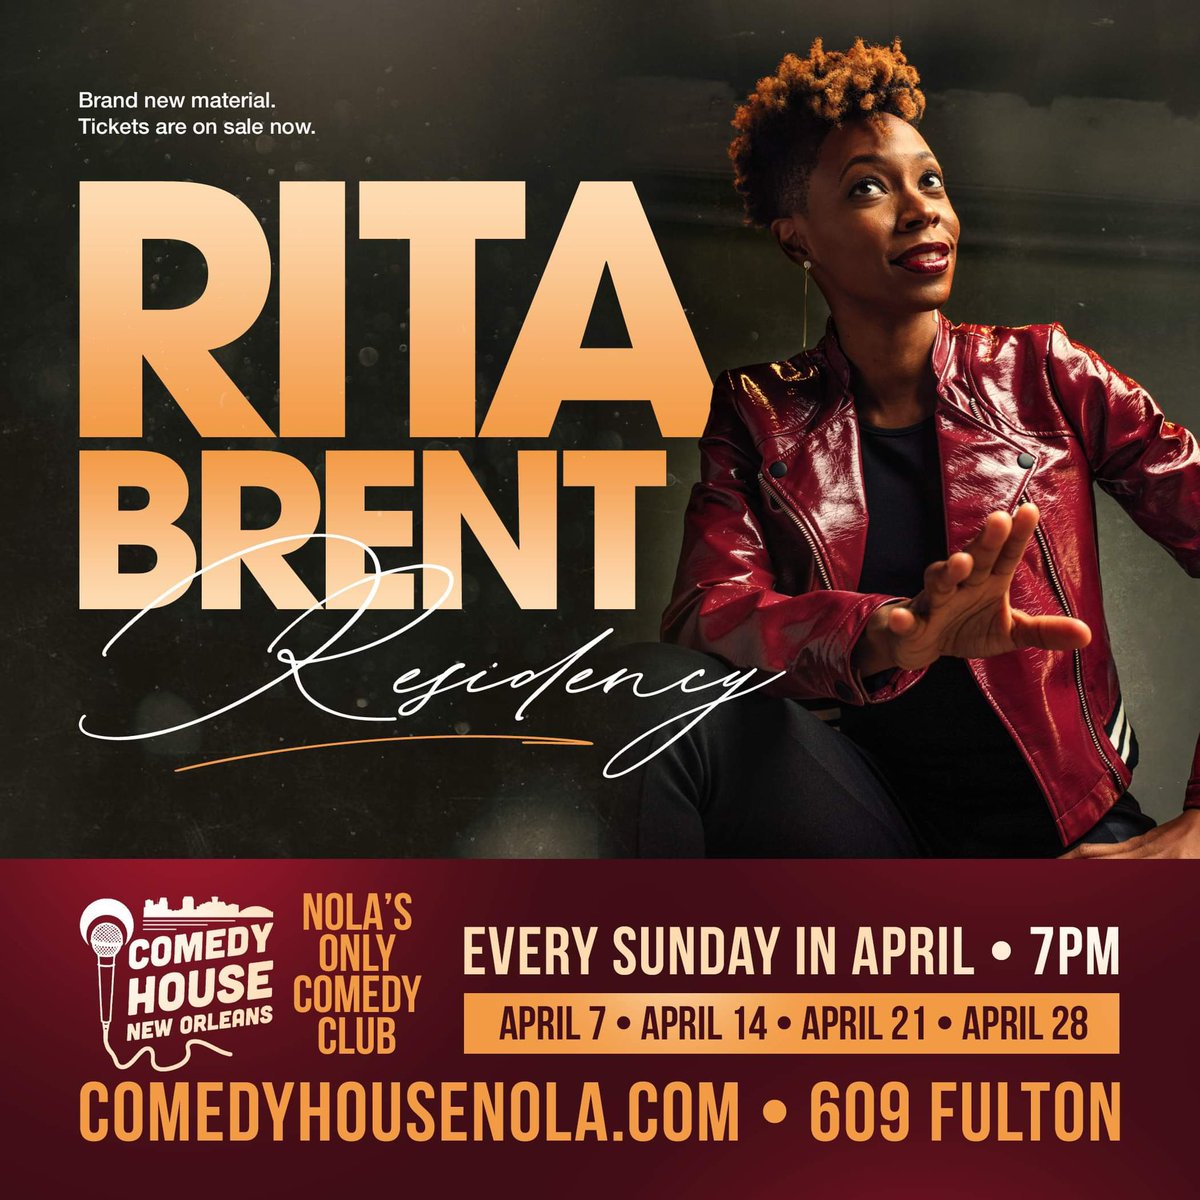 ONE SUNDAY LEFT! This Sunday, 4/28, is the LAST night of my New Orleans residency, AND it’s LIVE RECORDING time! Come be a part of my big night at Comedy House NOLA— 7pm. Seating is limited. Get tickets here: app.showslinger.com/ticket_payment… #retweet #roadtrip #neworleans #nola